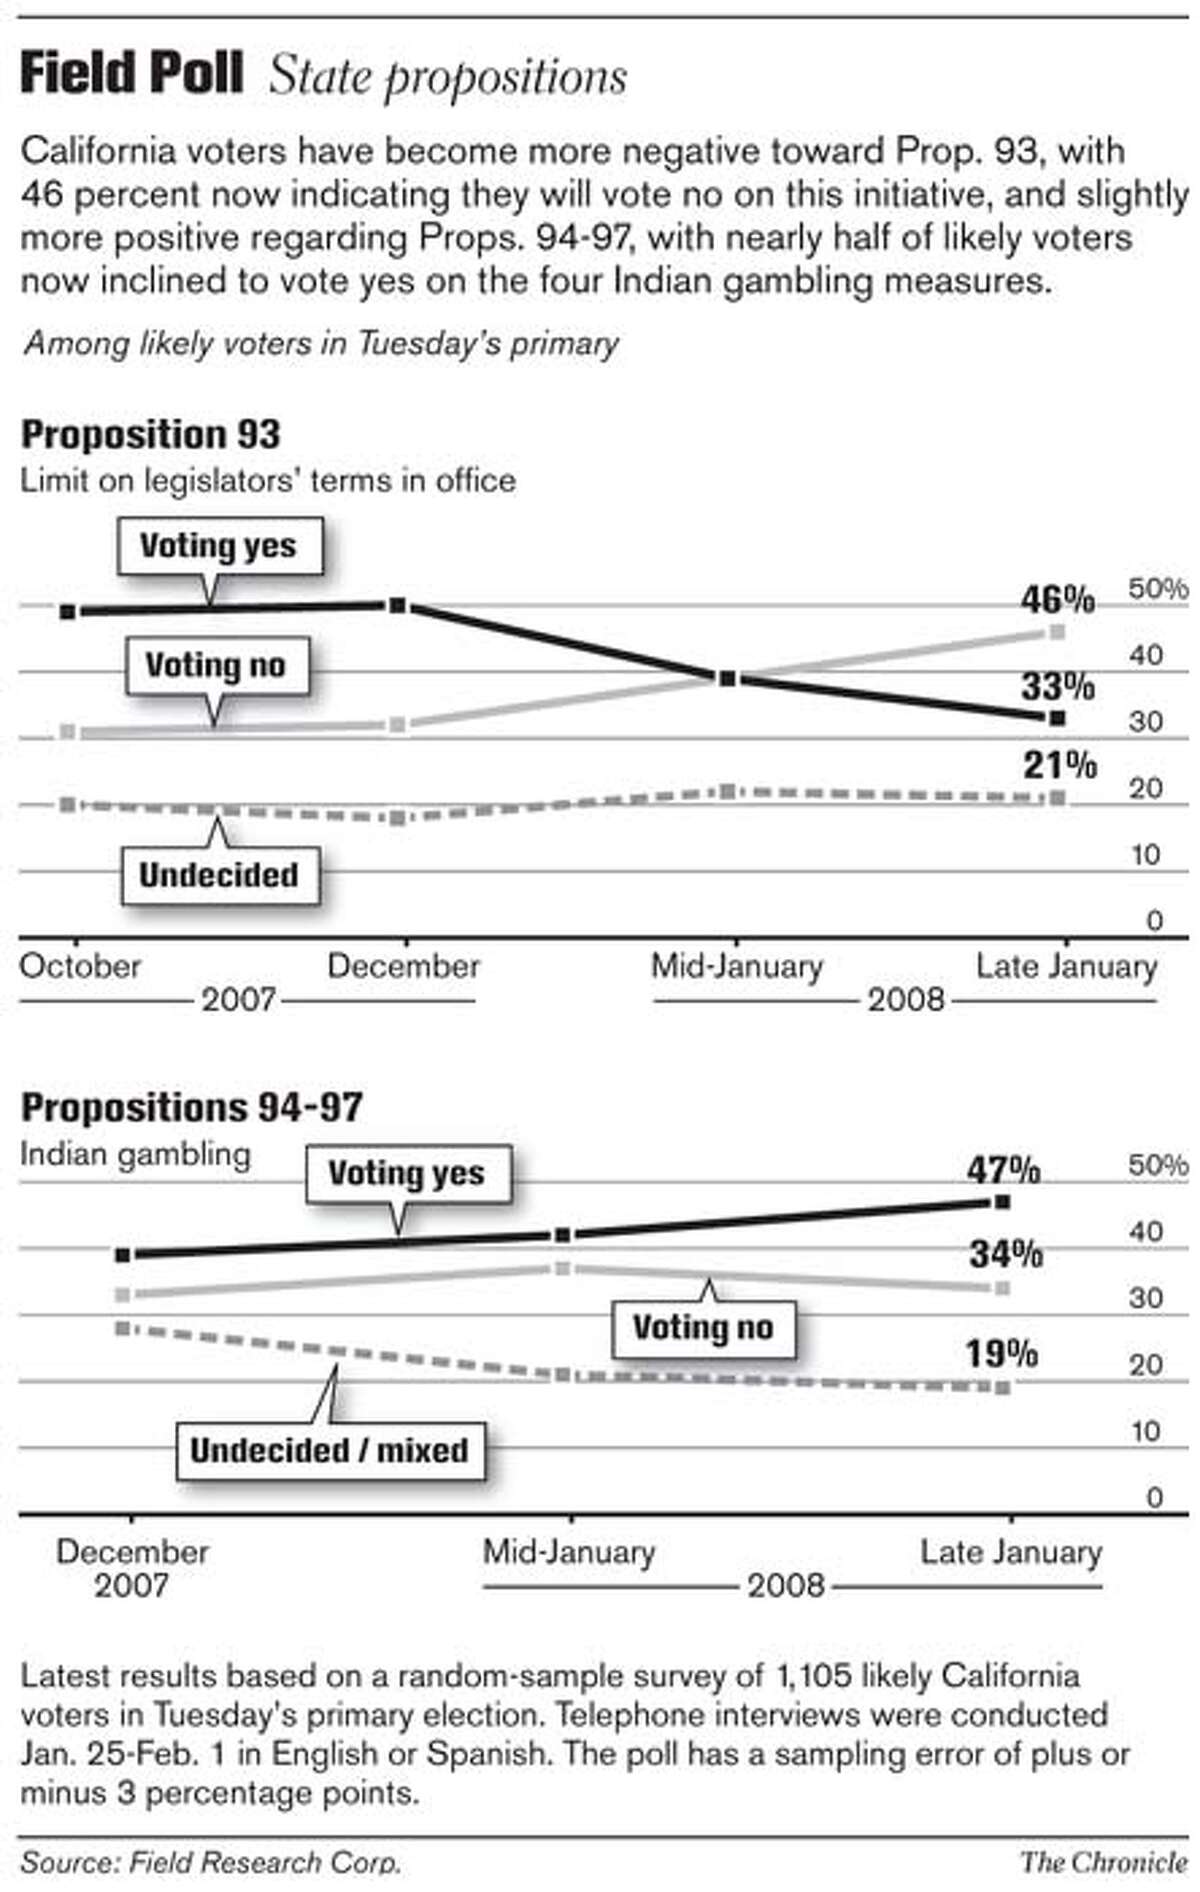 Field Poll: State propositions. Chronicle Graphic